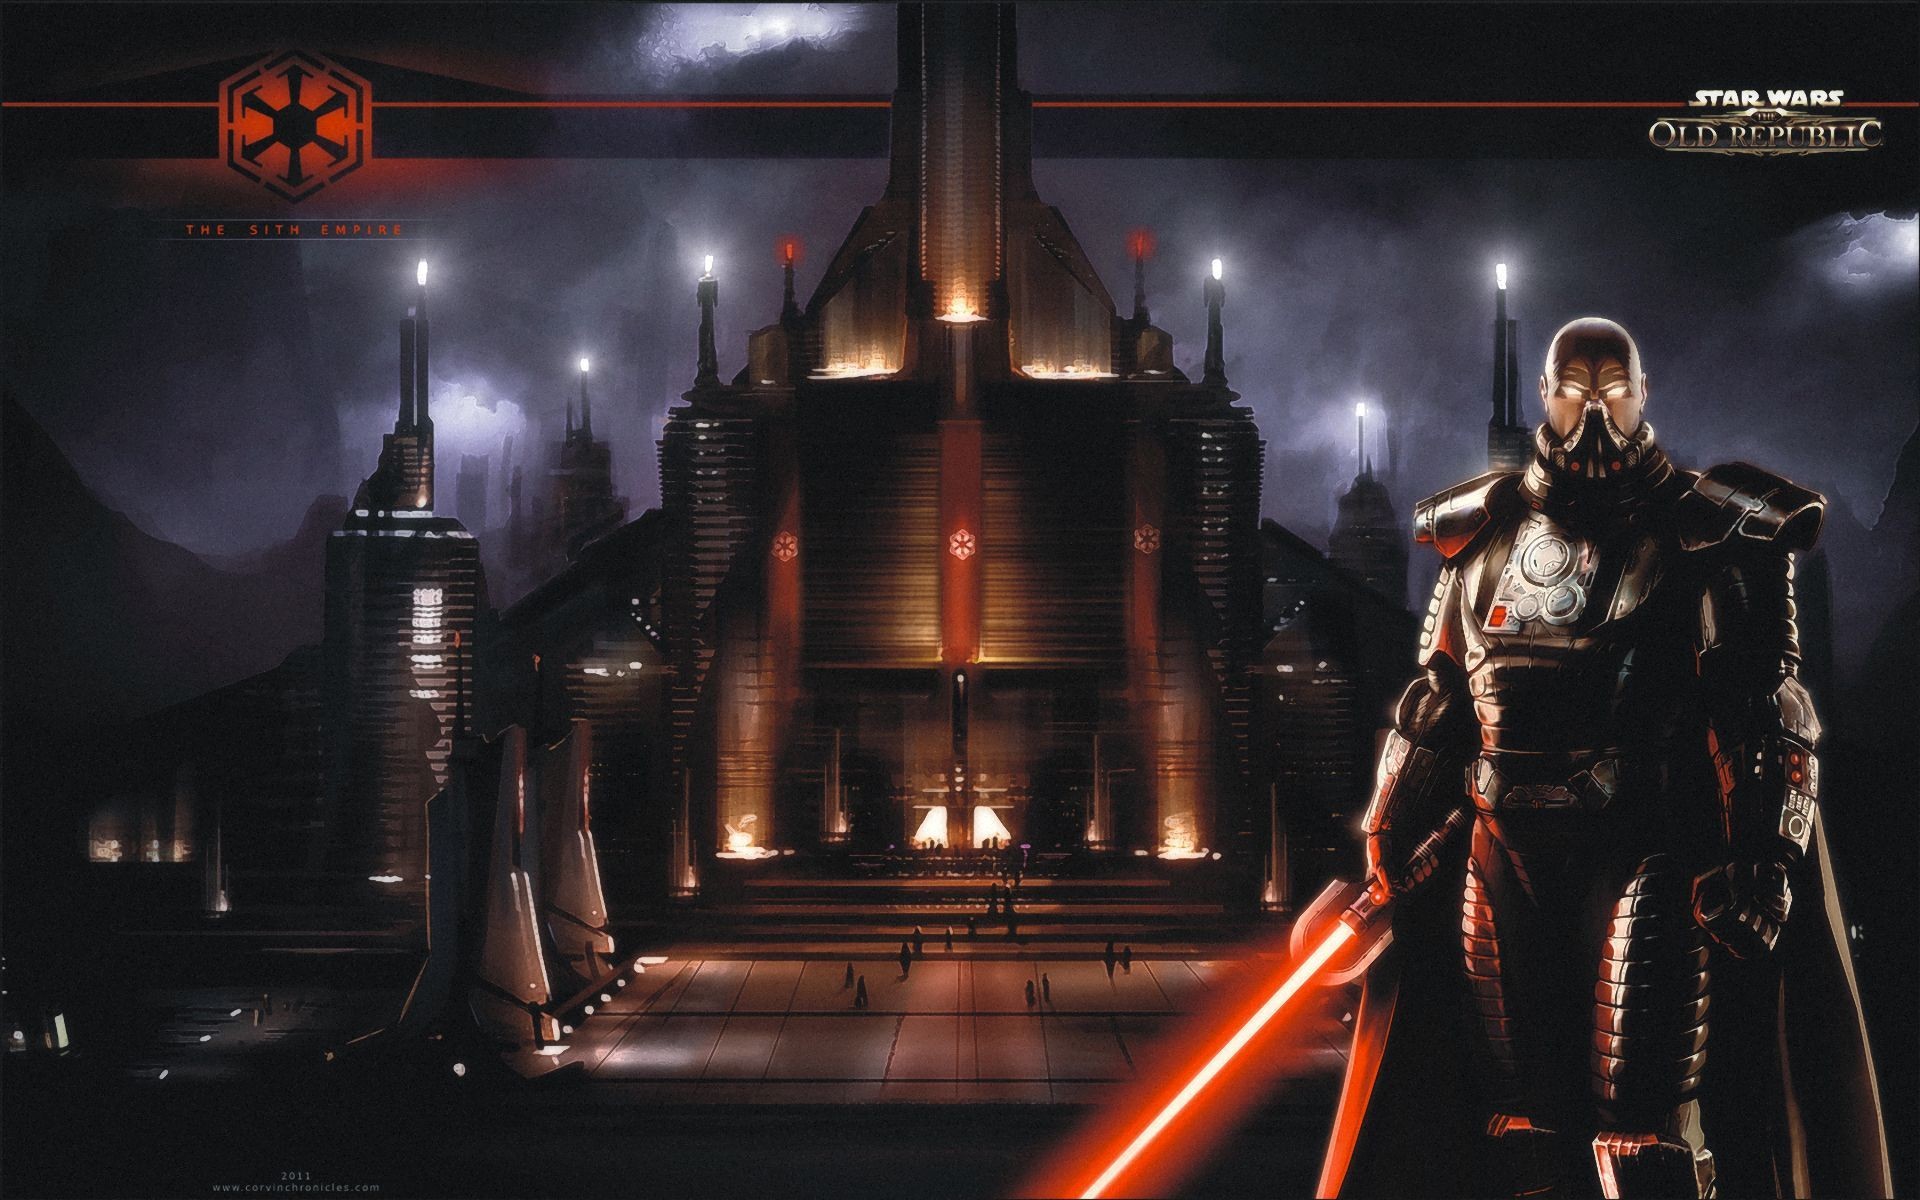 STAR WARS The Old Republic – Sith / Republic Wallpapers